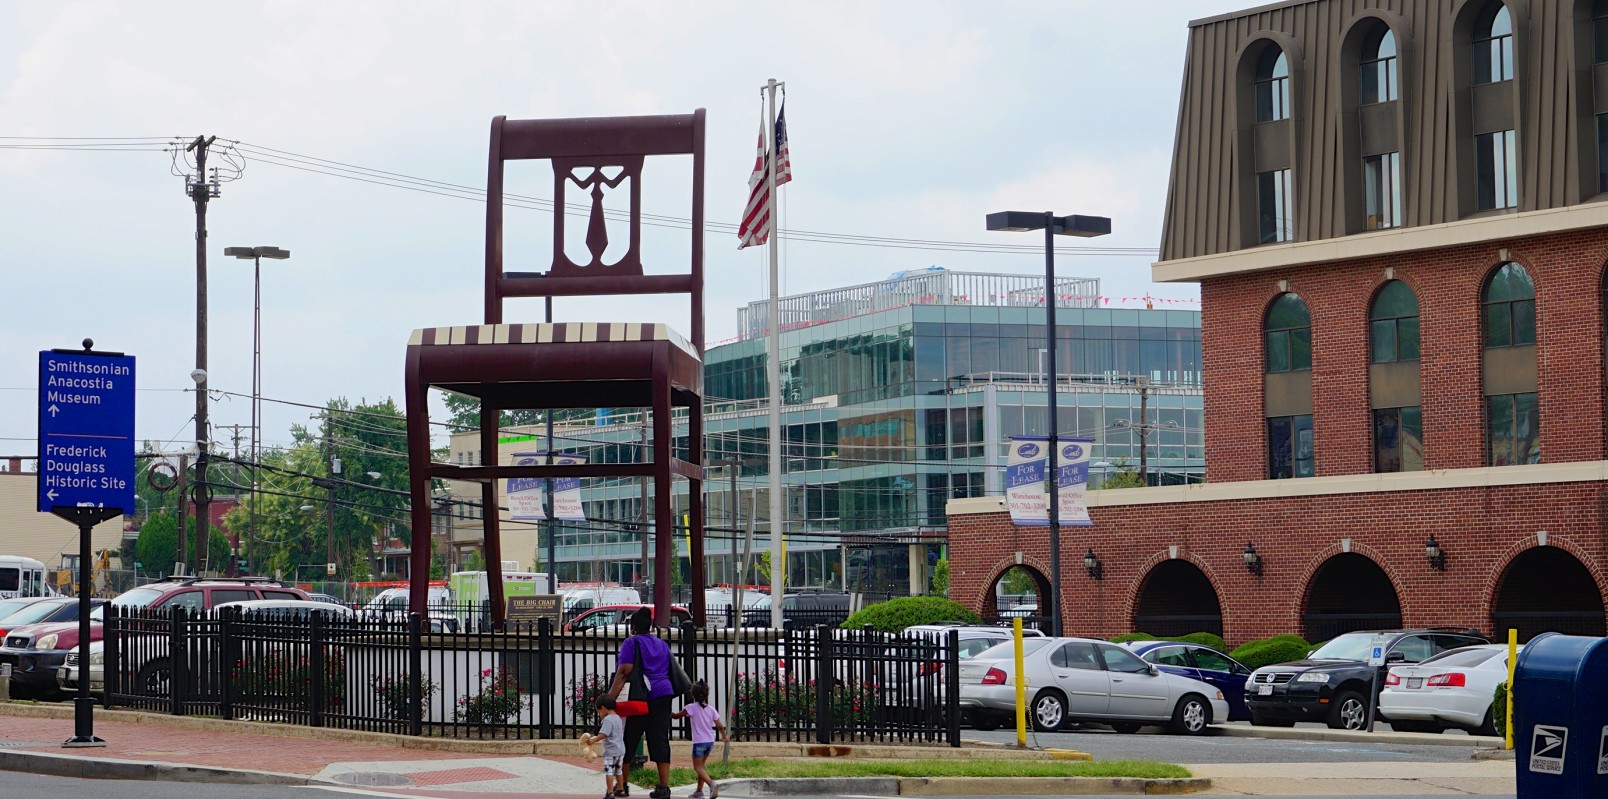 The Big Chair in Anacostia